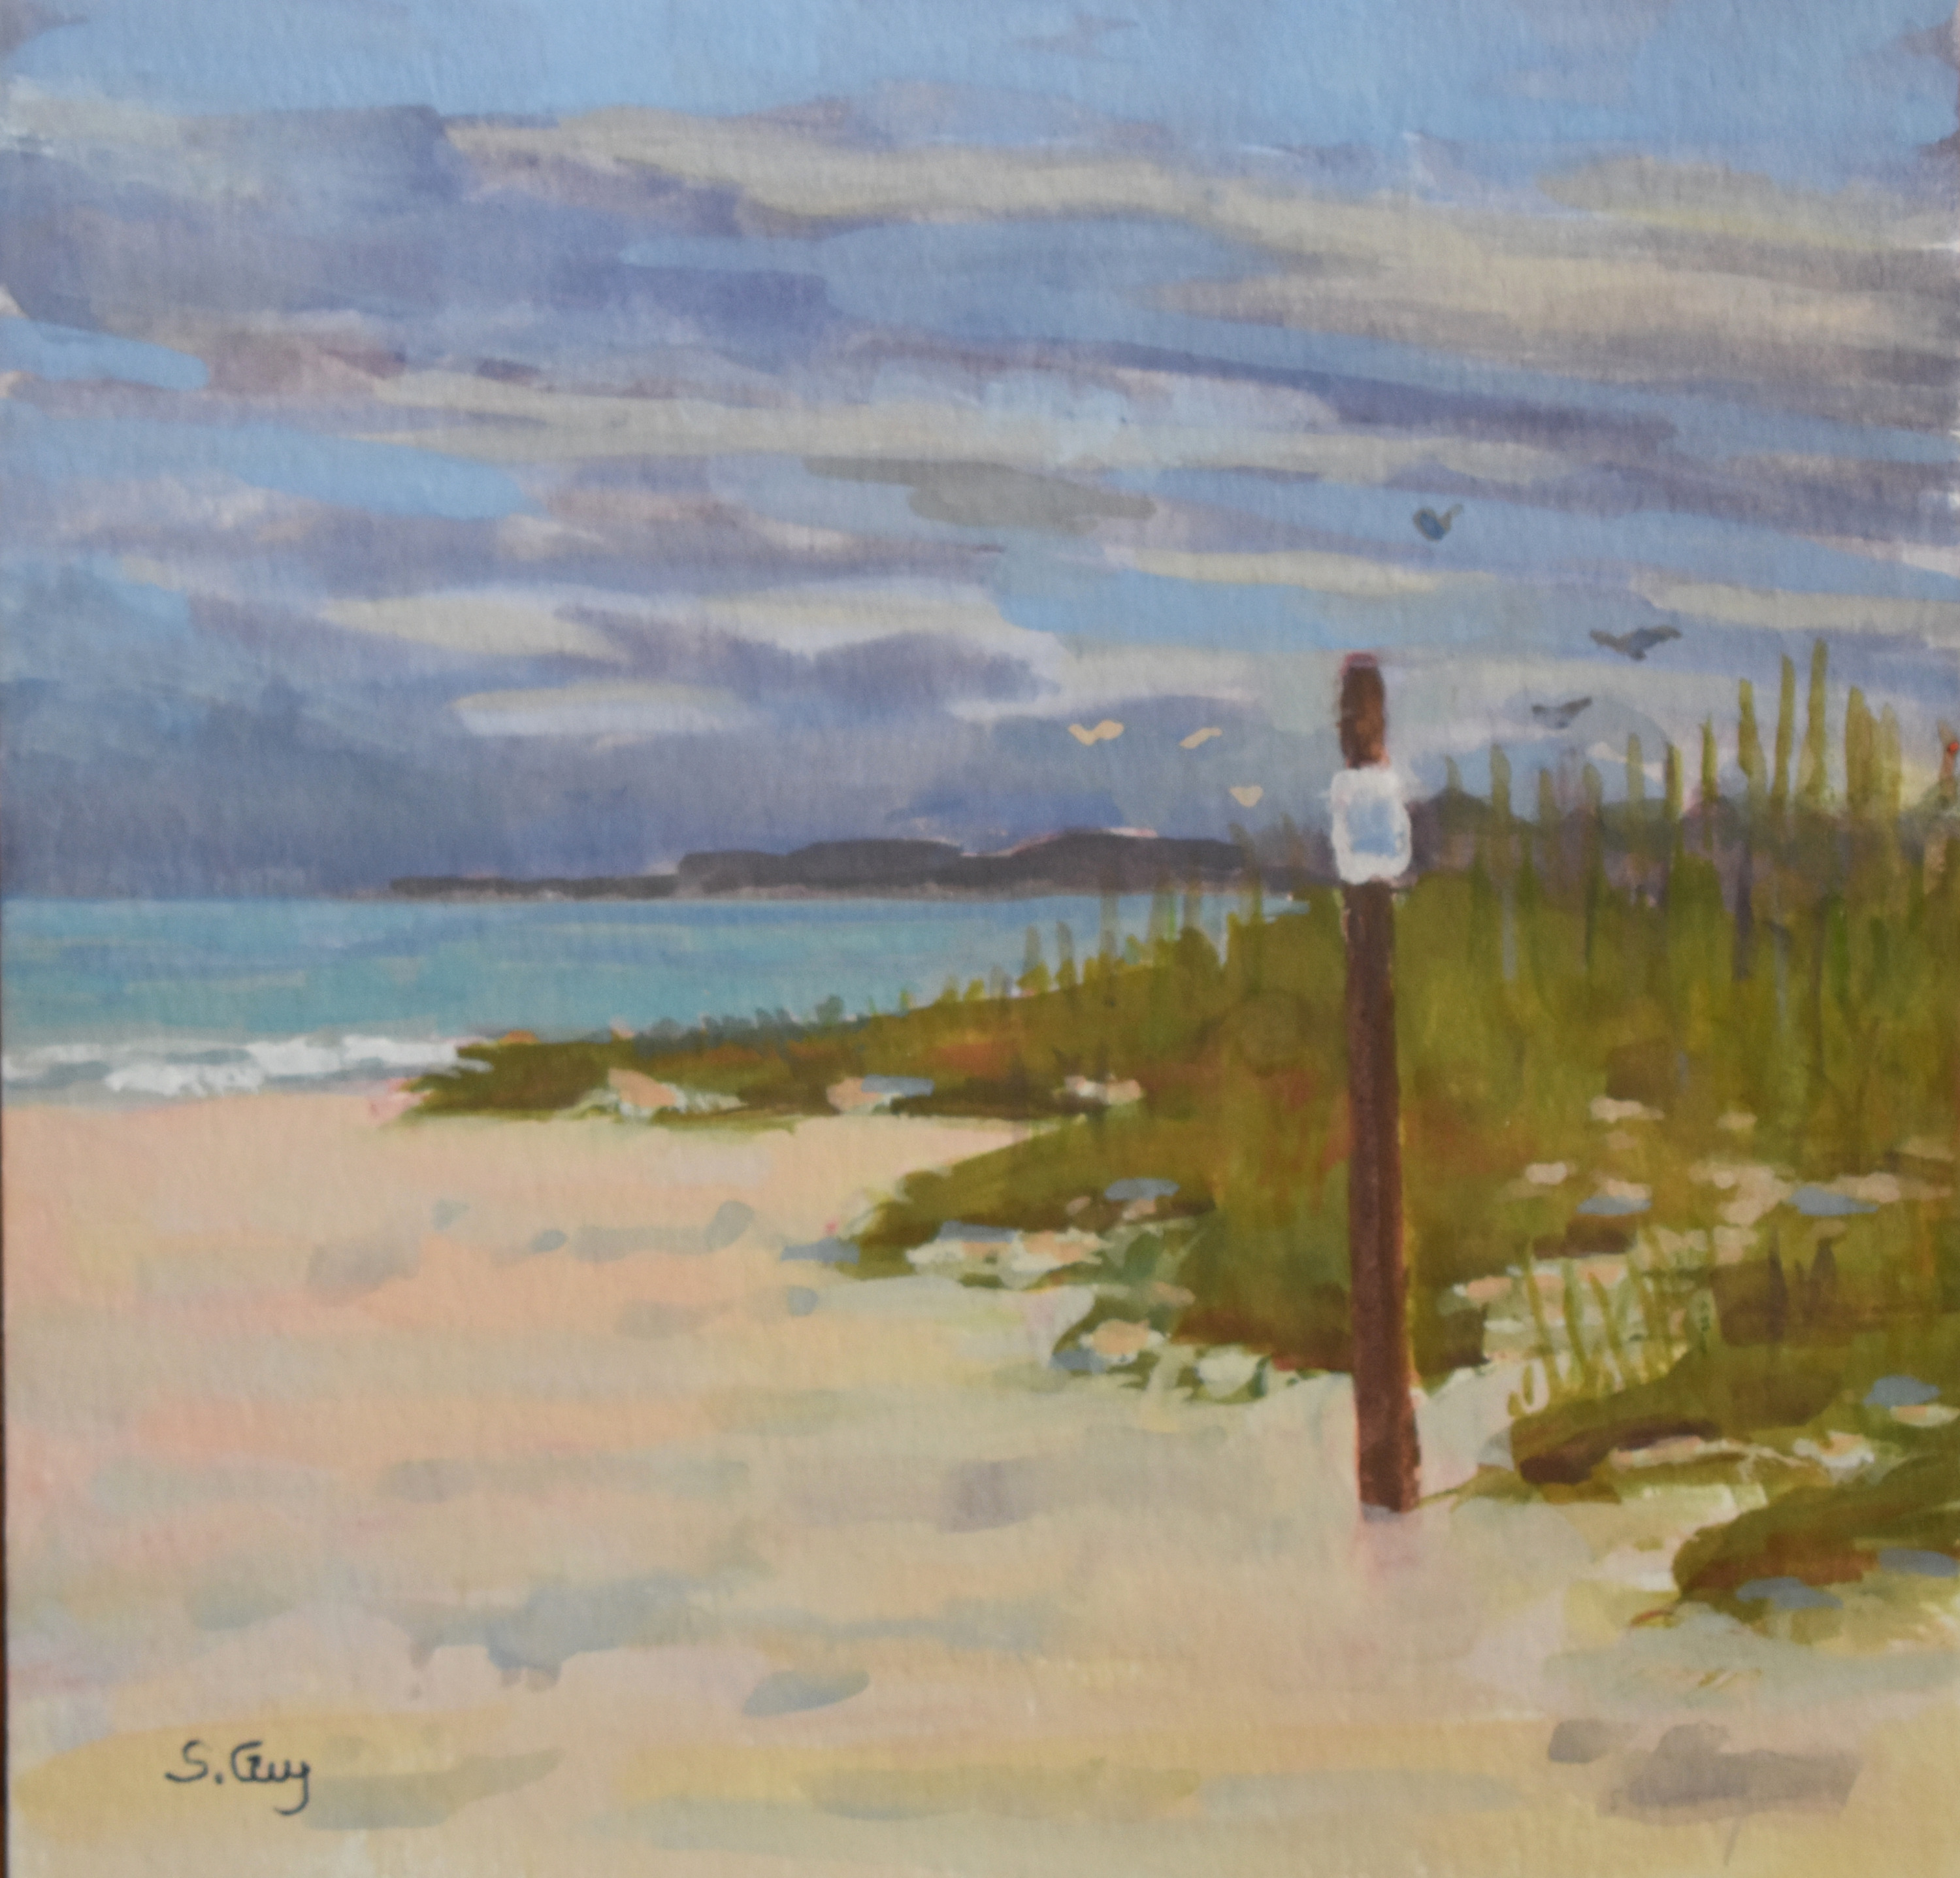 The north end gouache daily painting nokomis beach modern seascape nature art sharon guy bb2old